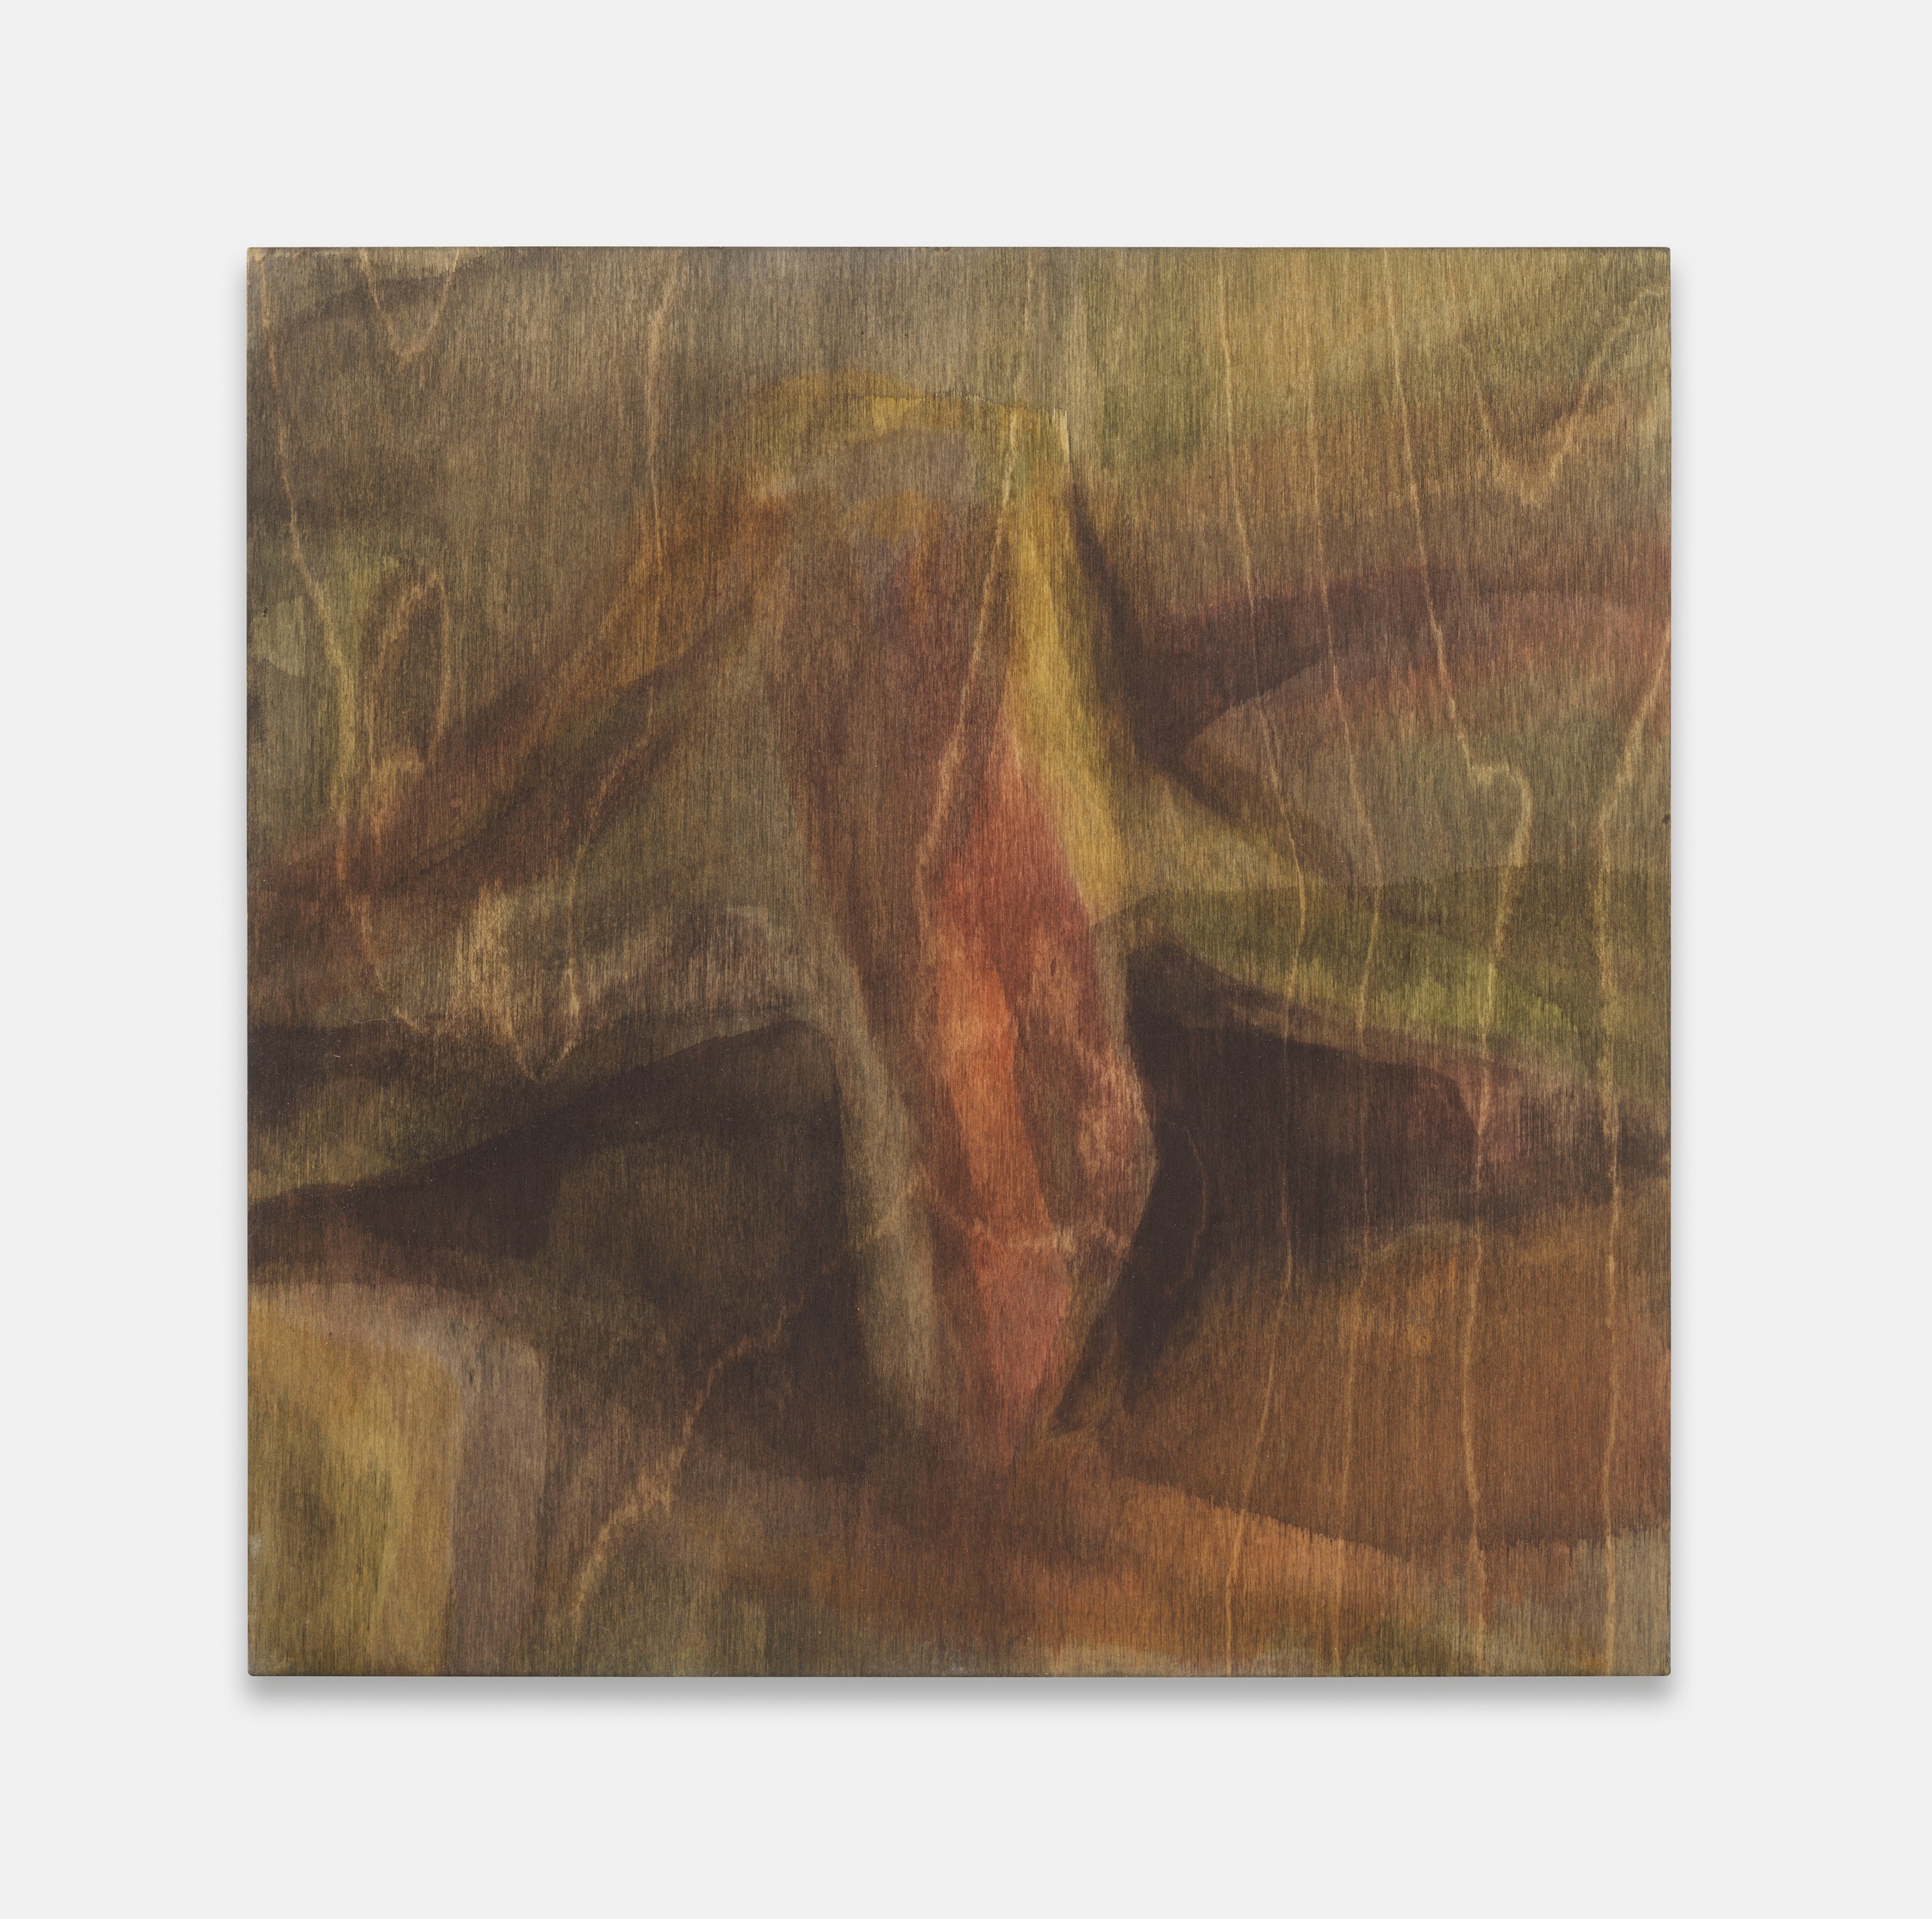 Beaux MendesUntitled, 2023wood stain on panel30.5 x 30.5 cm | 12 x 12 in